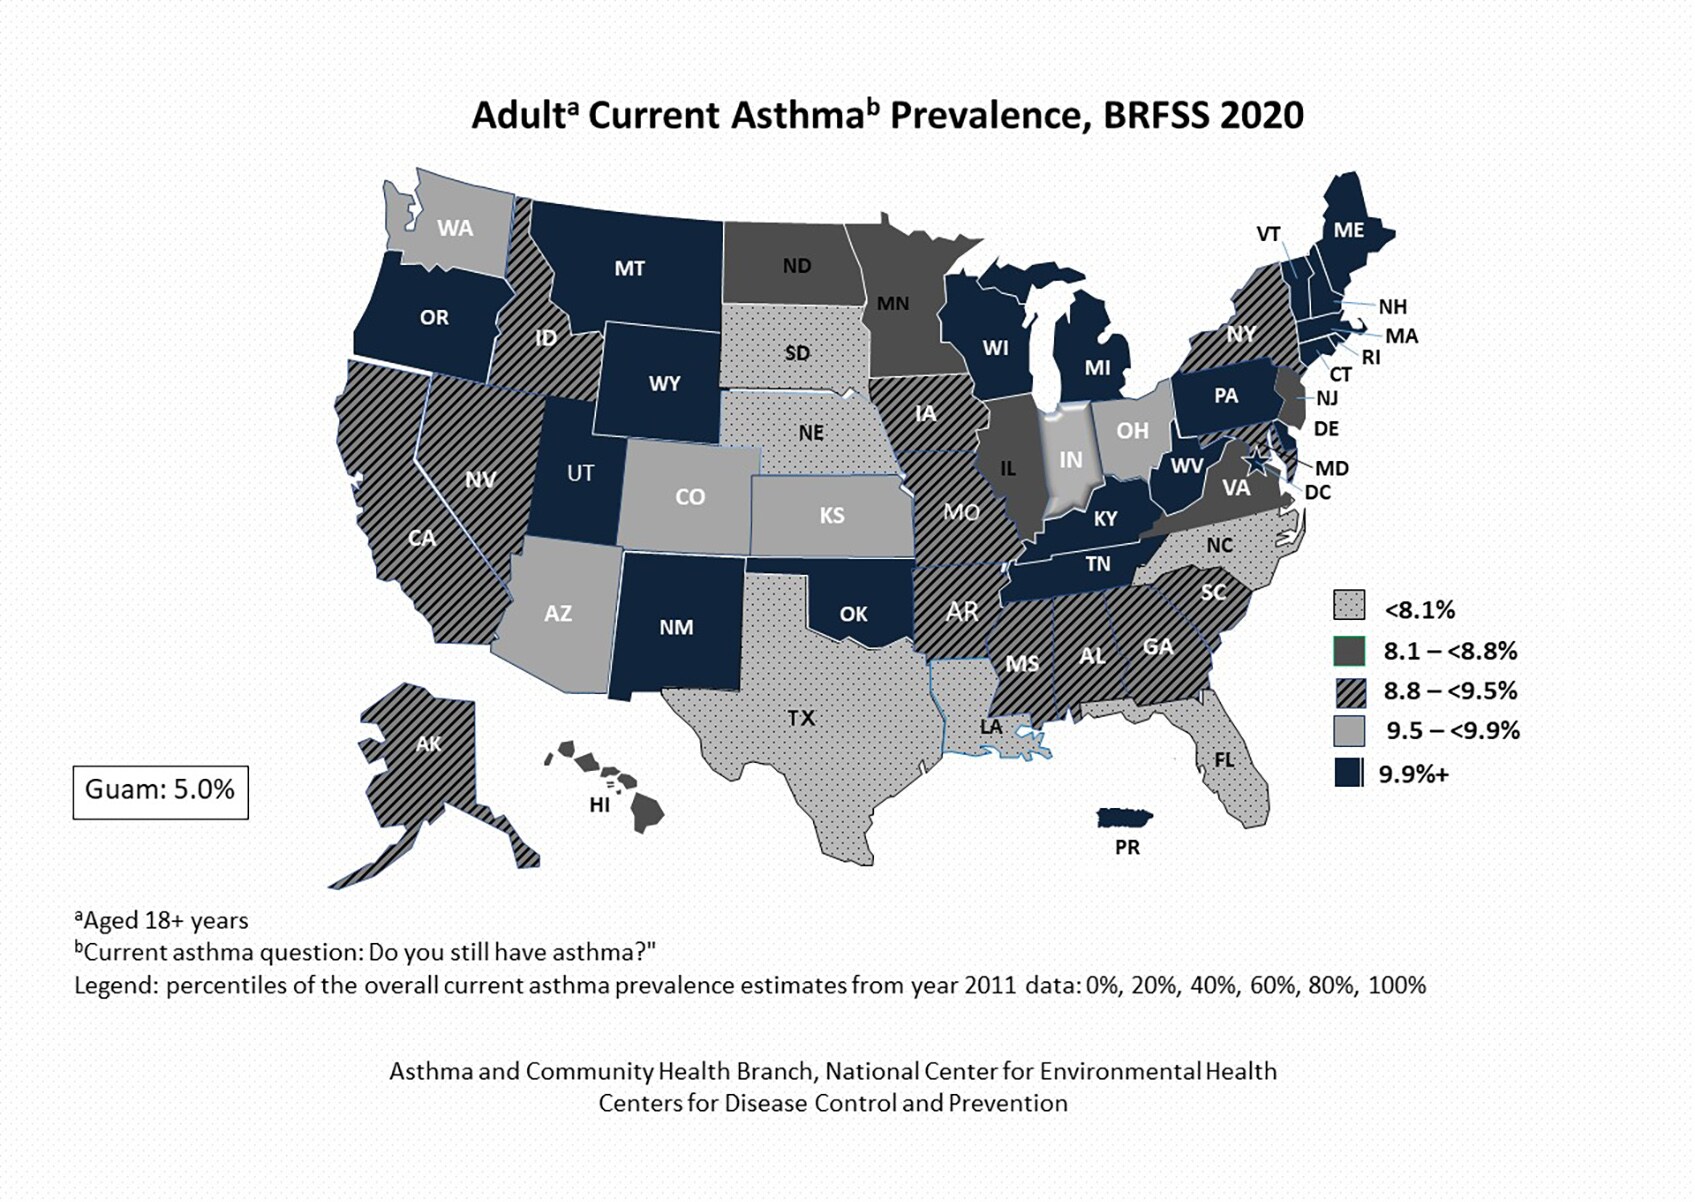 Black and white U.S. map showing adult self-reported current asthma prevalence by state for BRFSS 2020